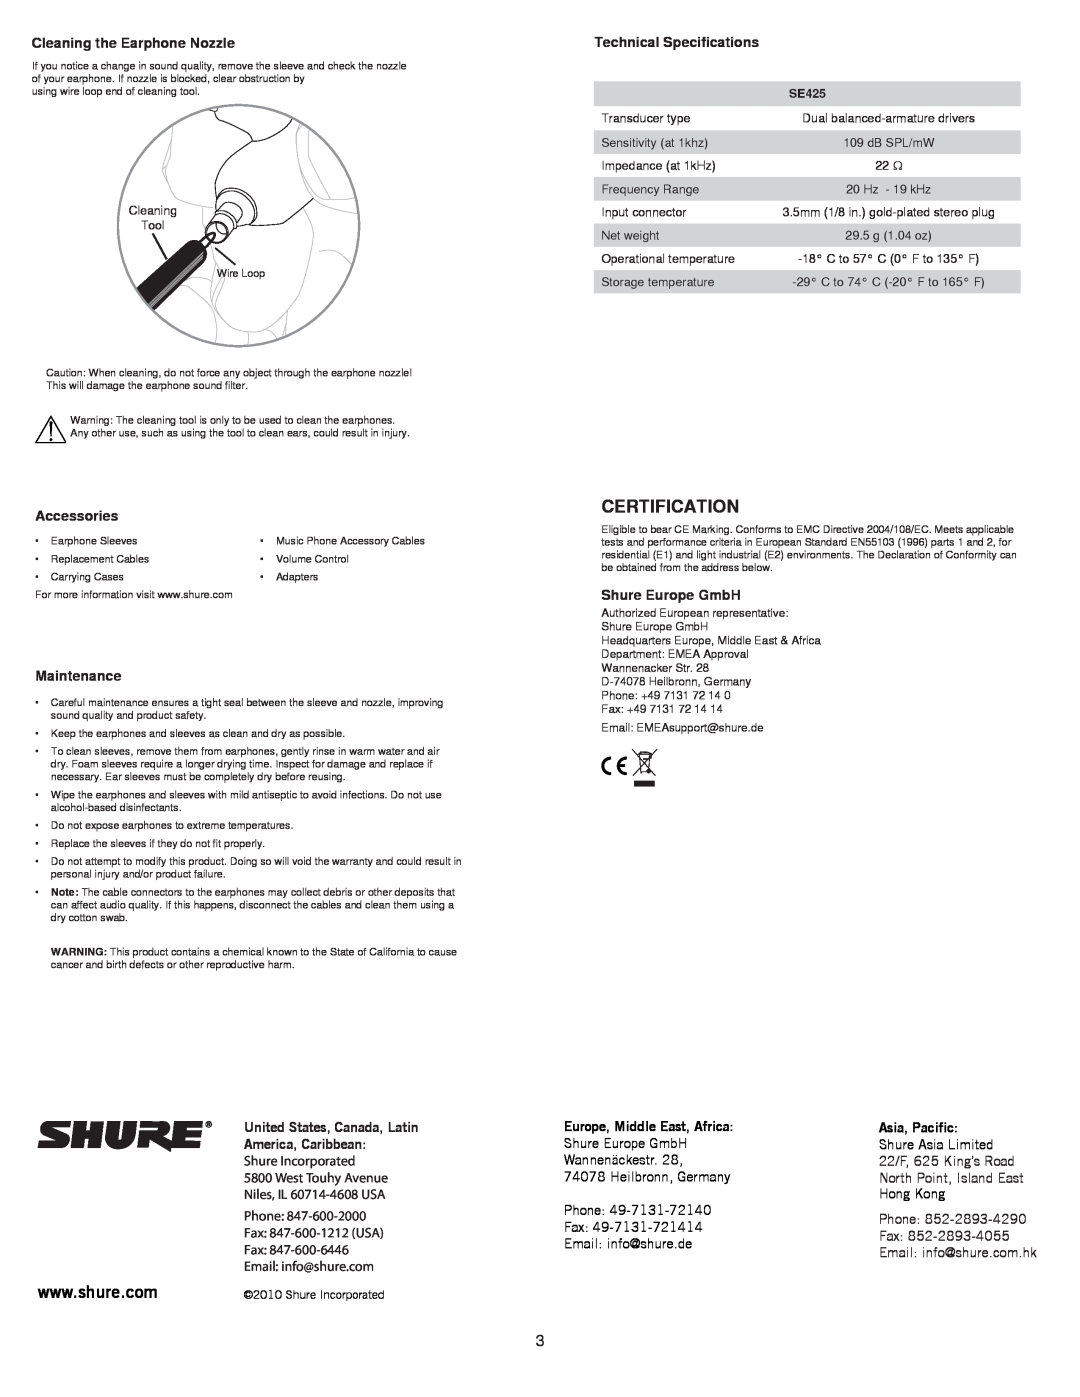 Shure se425cl manual Cleaning the Earphone Nozzle, Accessories, Maintenance, Technical Specifications, Shure Europe GmbH 